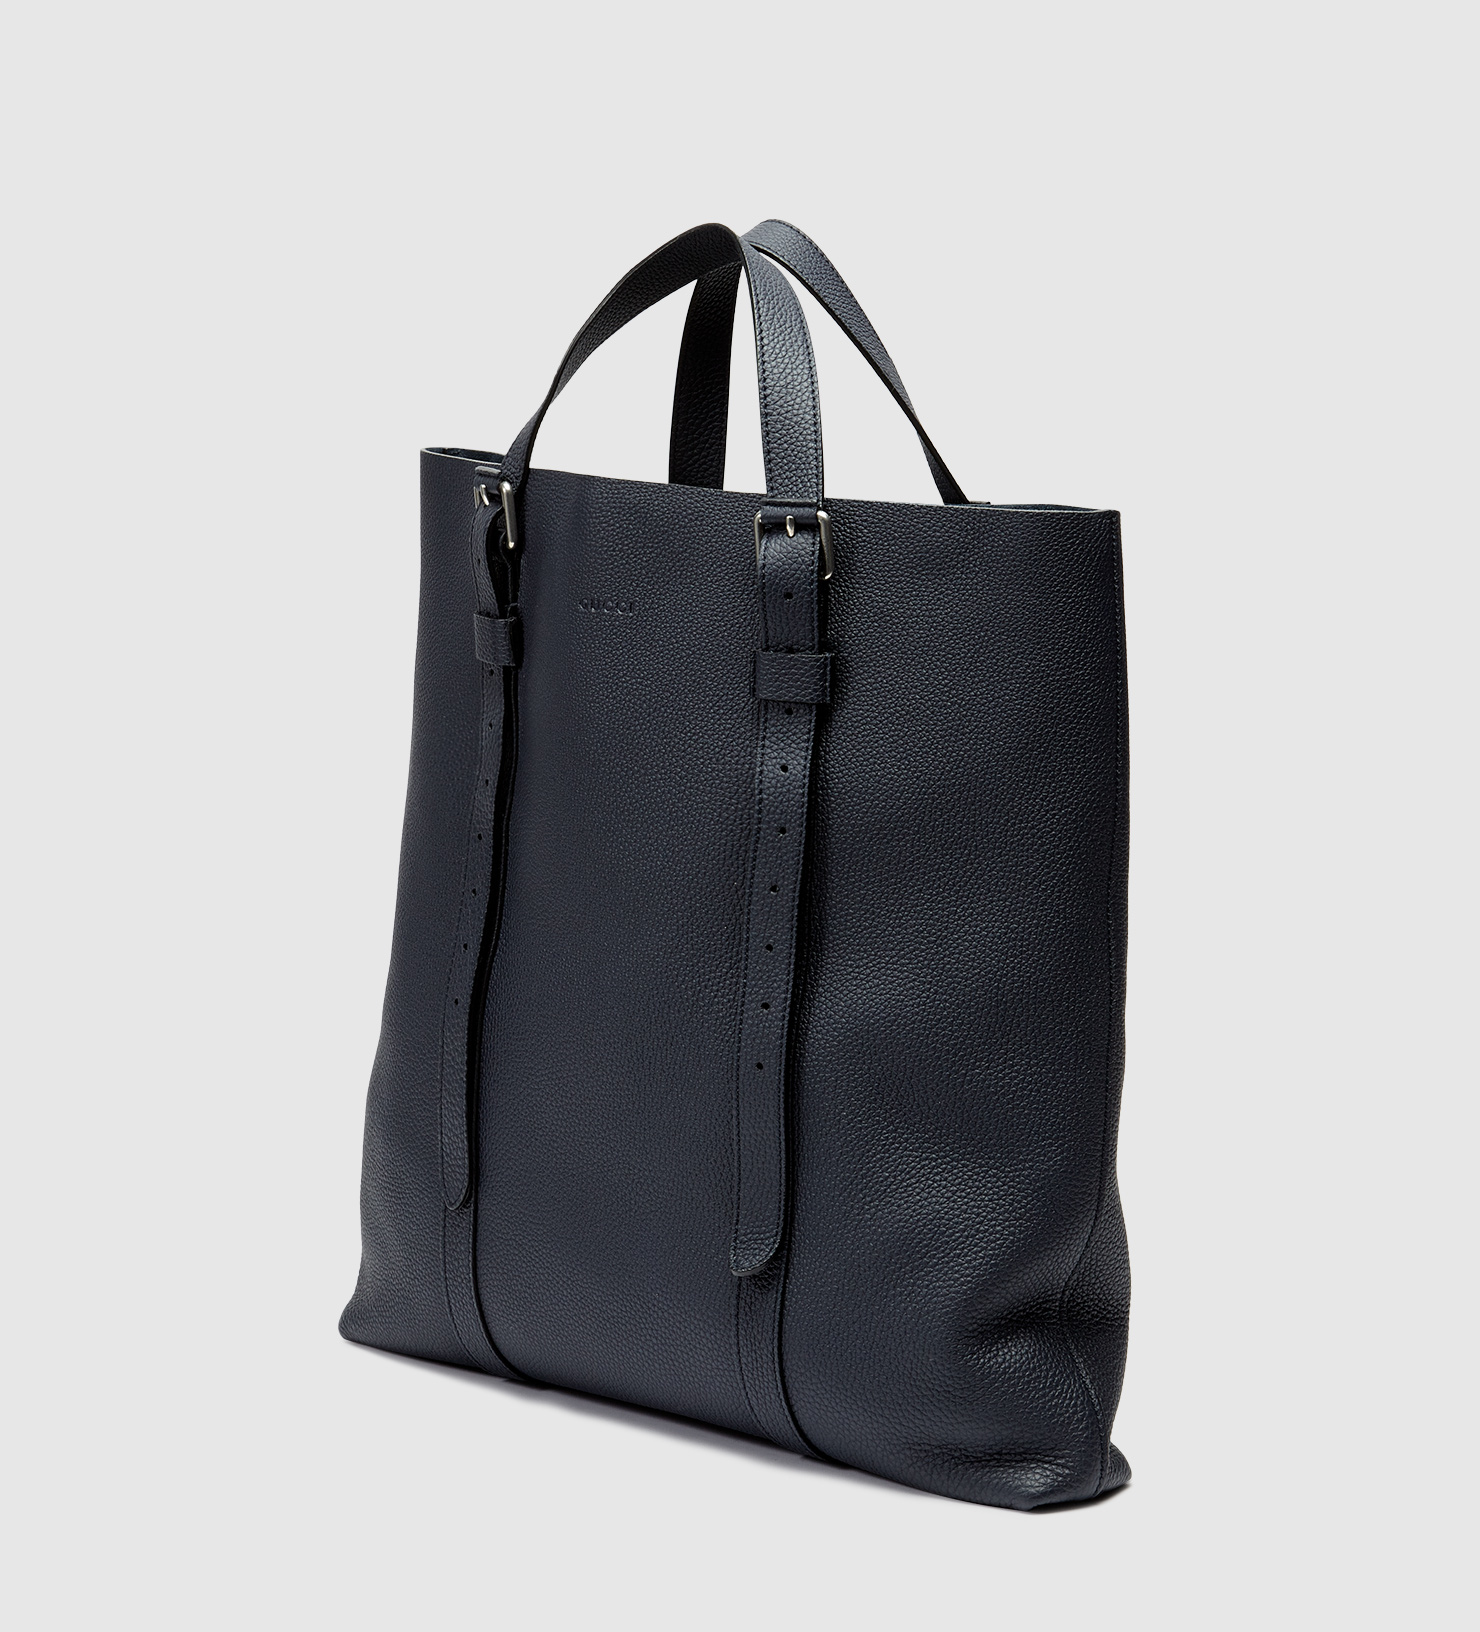 Gucci Convertible Leather Tote Bag in Black for Men - Lyst